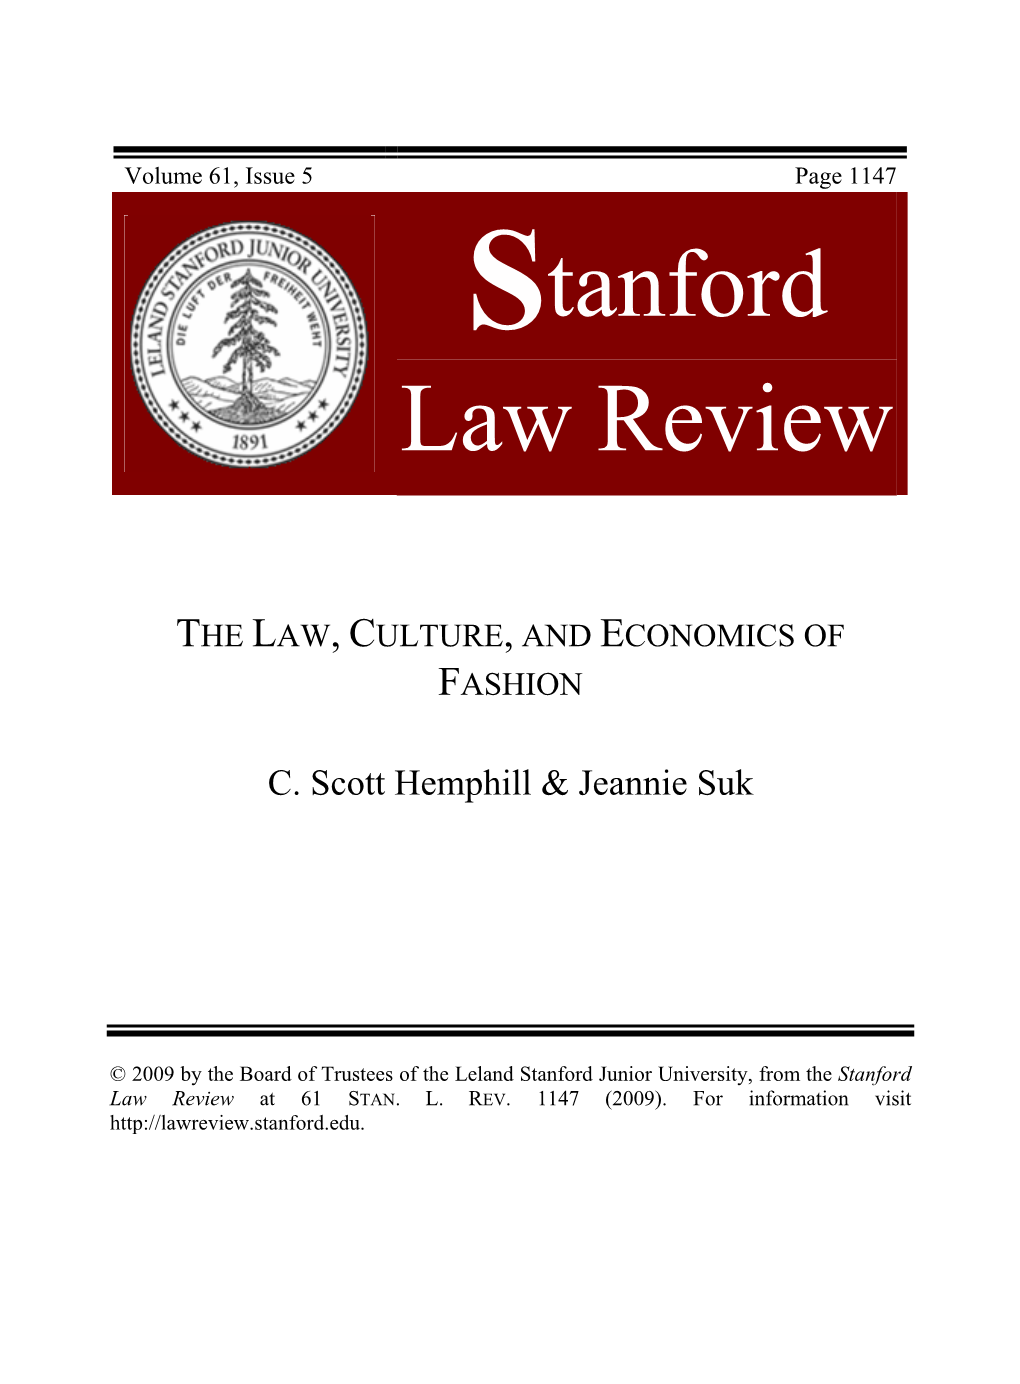 The Law, Culture and Economics of Fashion